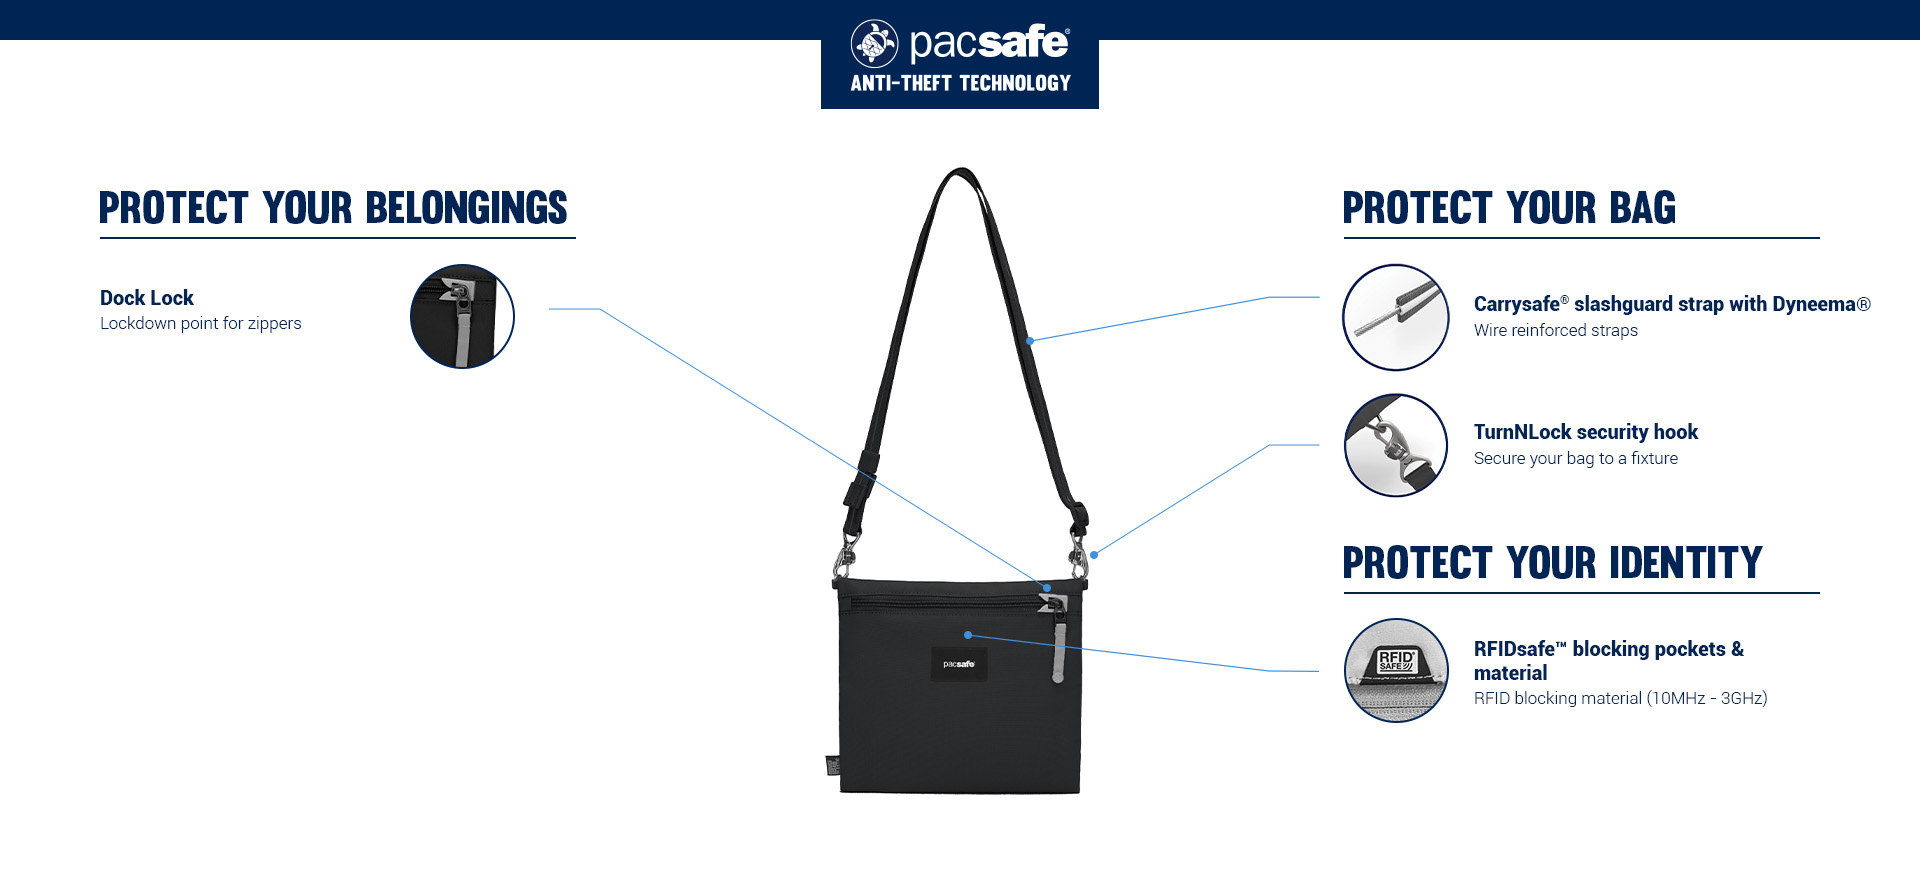 Protect Your Belongings - Dock lock - Lock down point for zippers. 
Protect Your Bag - Carrysafe slashguard strap with Dyneema - wire reinforced straps.
TurnNLock security hooks - Secure your bag to a fixture.
Protect Your Identity - RFIDsafe blocking pockets & material - RFID blocking material (10 MHz - 3 GHz)